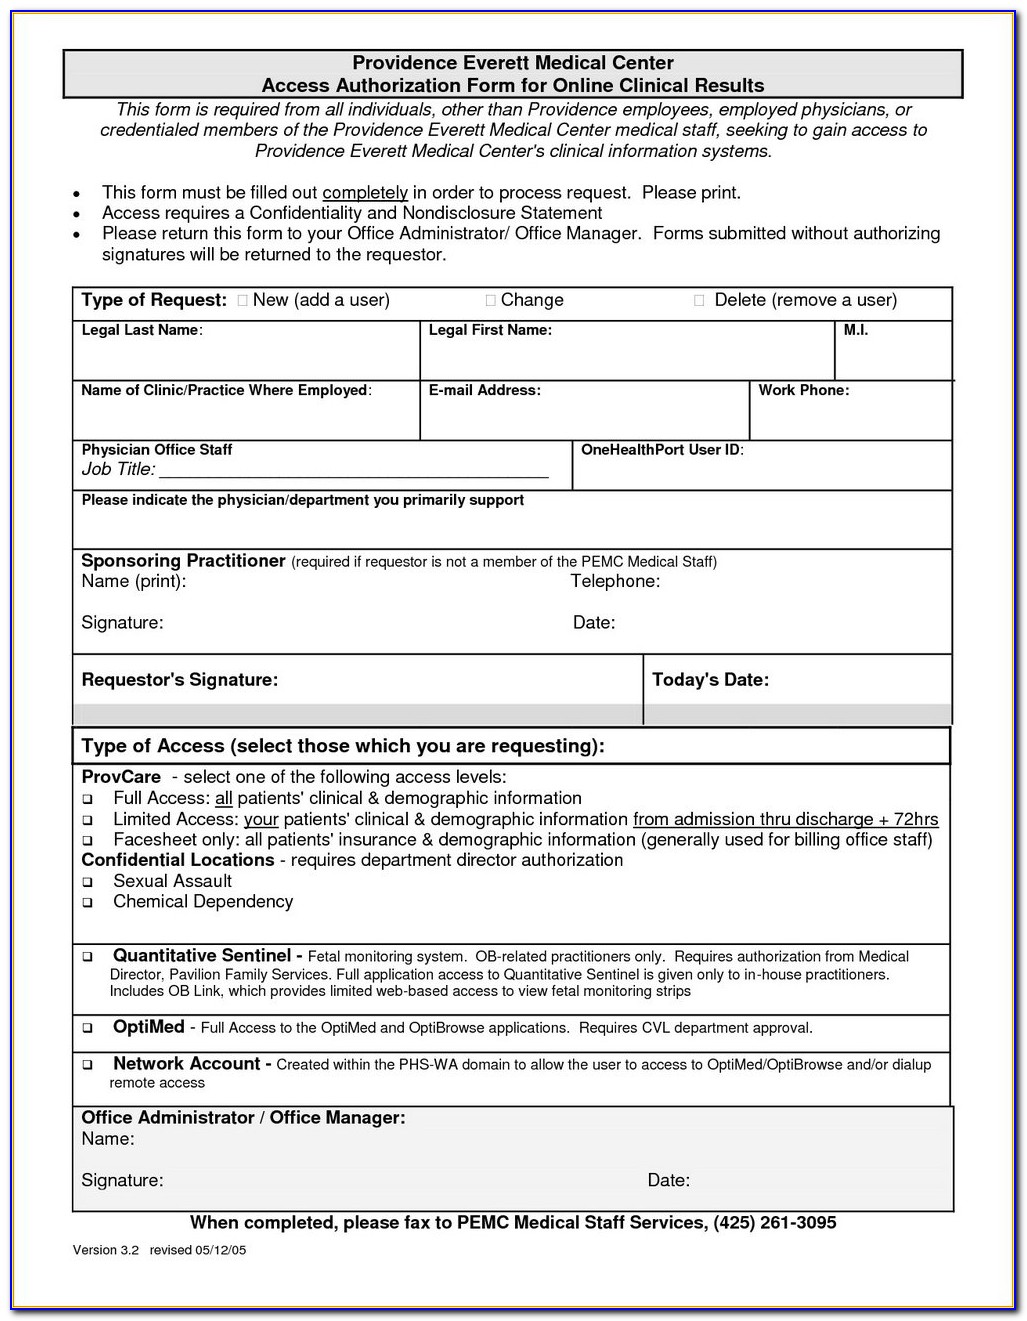 Cms 1500 Paper Claim Filing Instructions